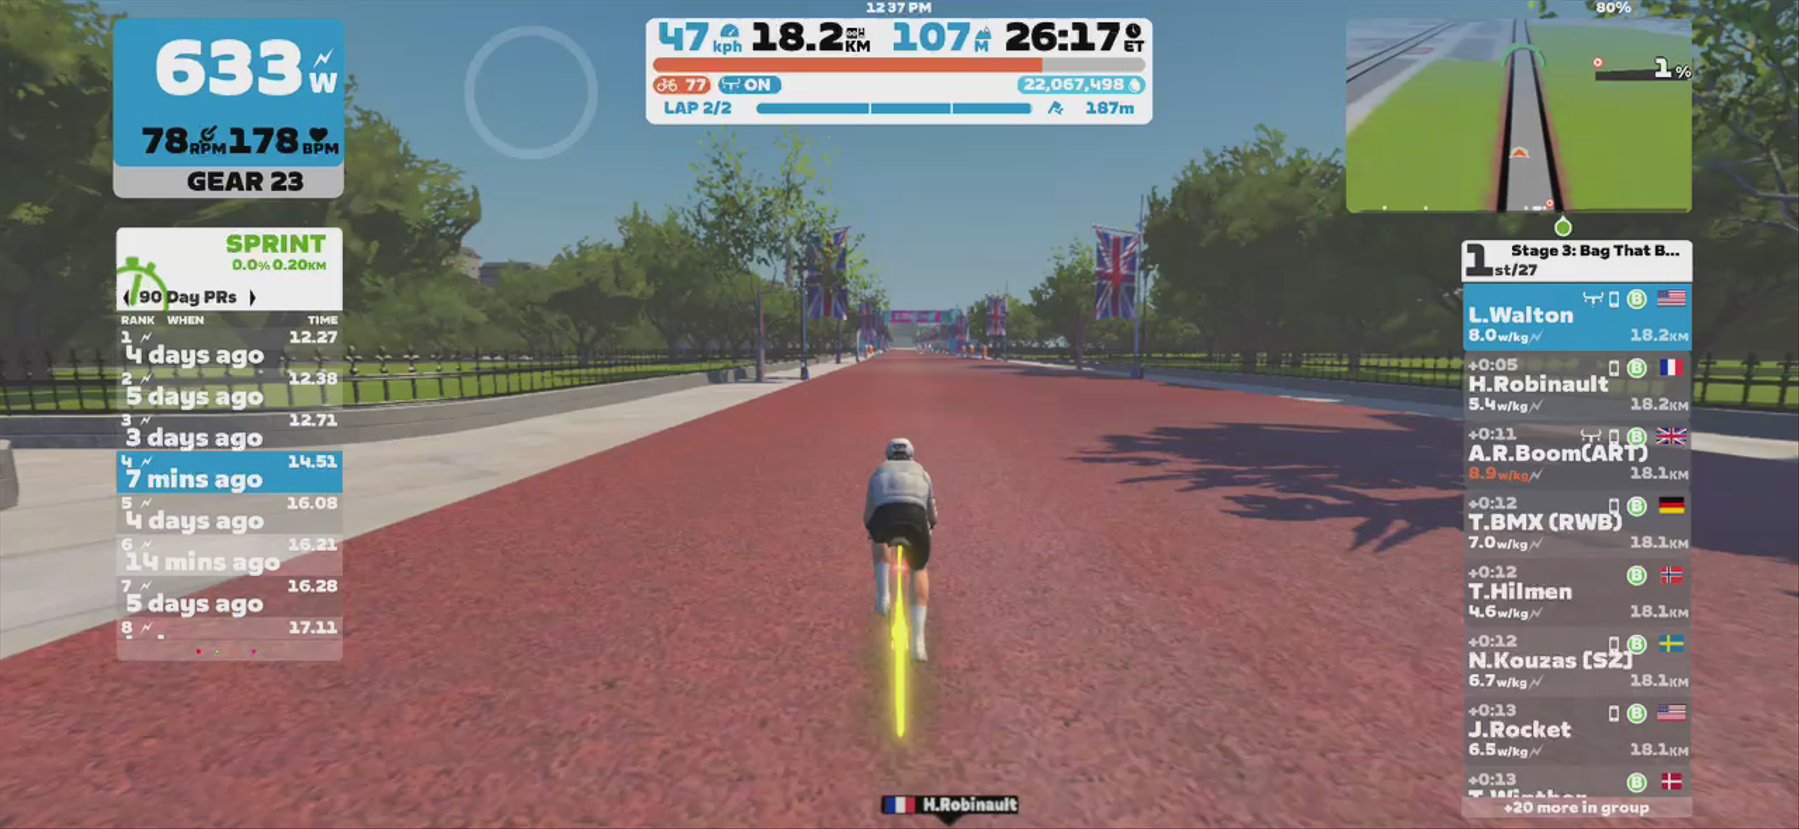 Zwift - Race: Stage 3: Bag That Badge - London Classique Reverse (B) on Classique Reverse in London